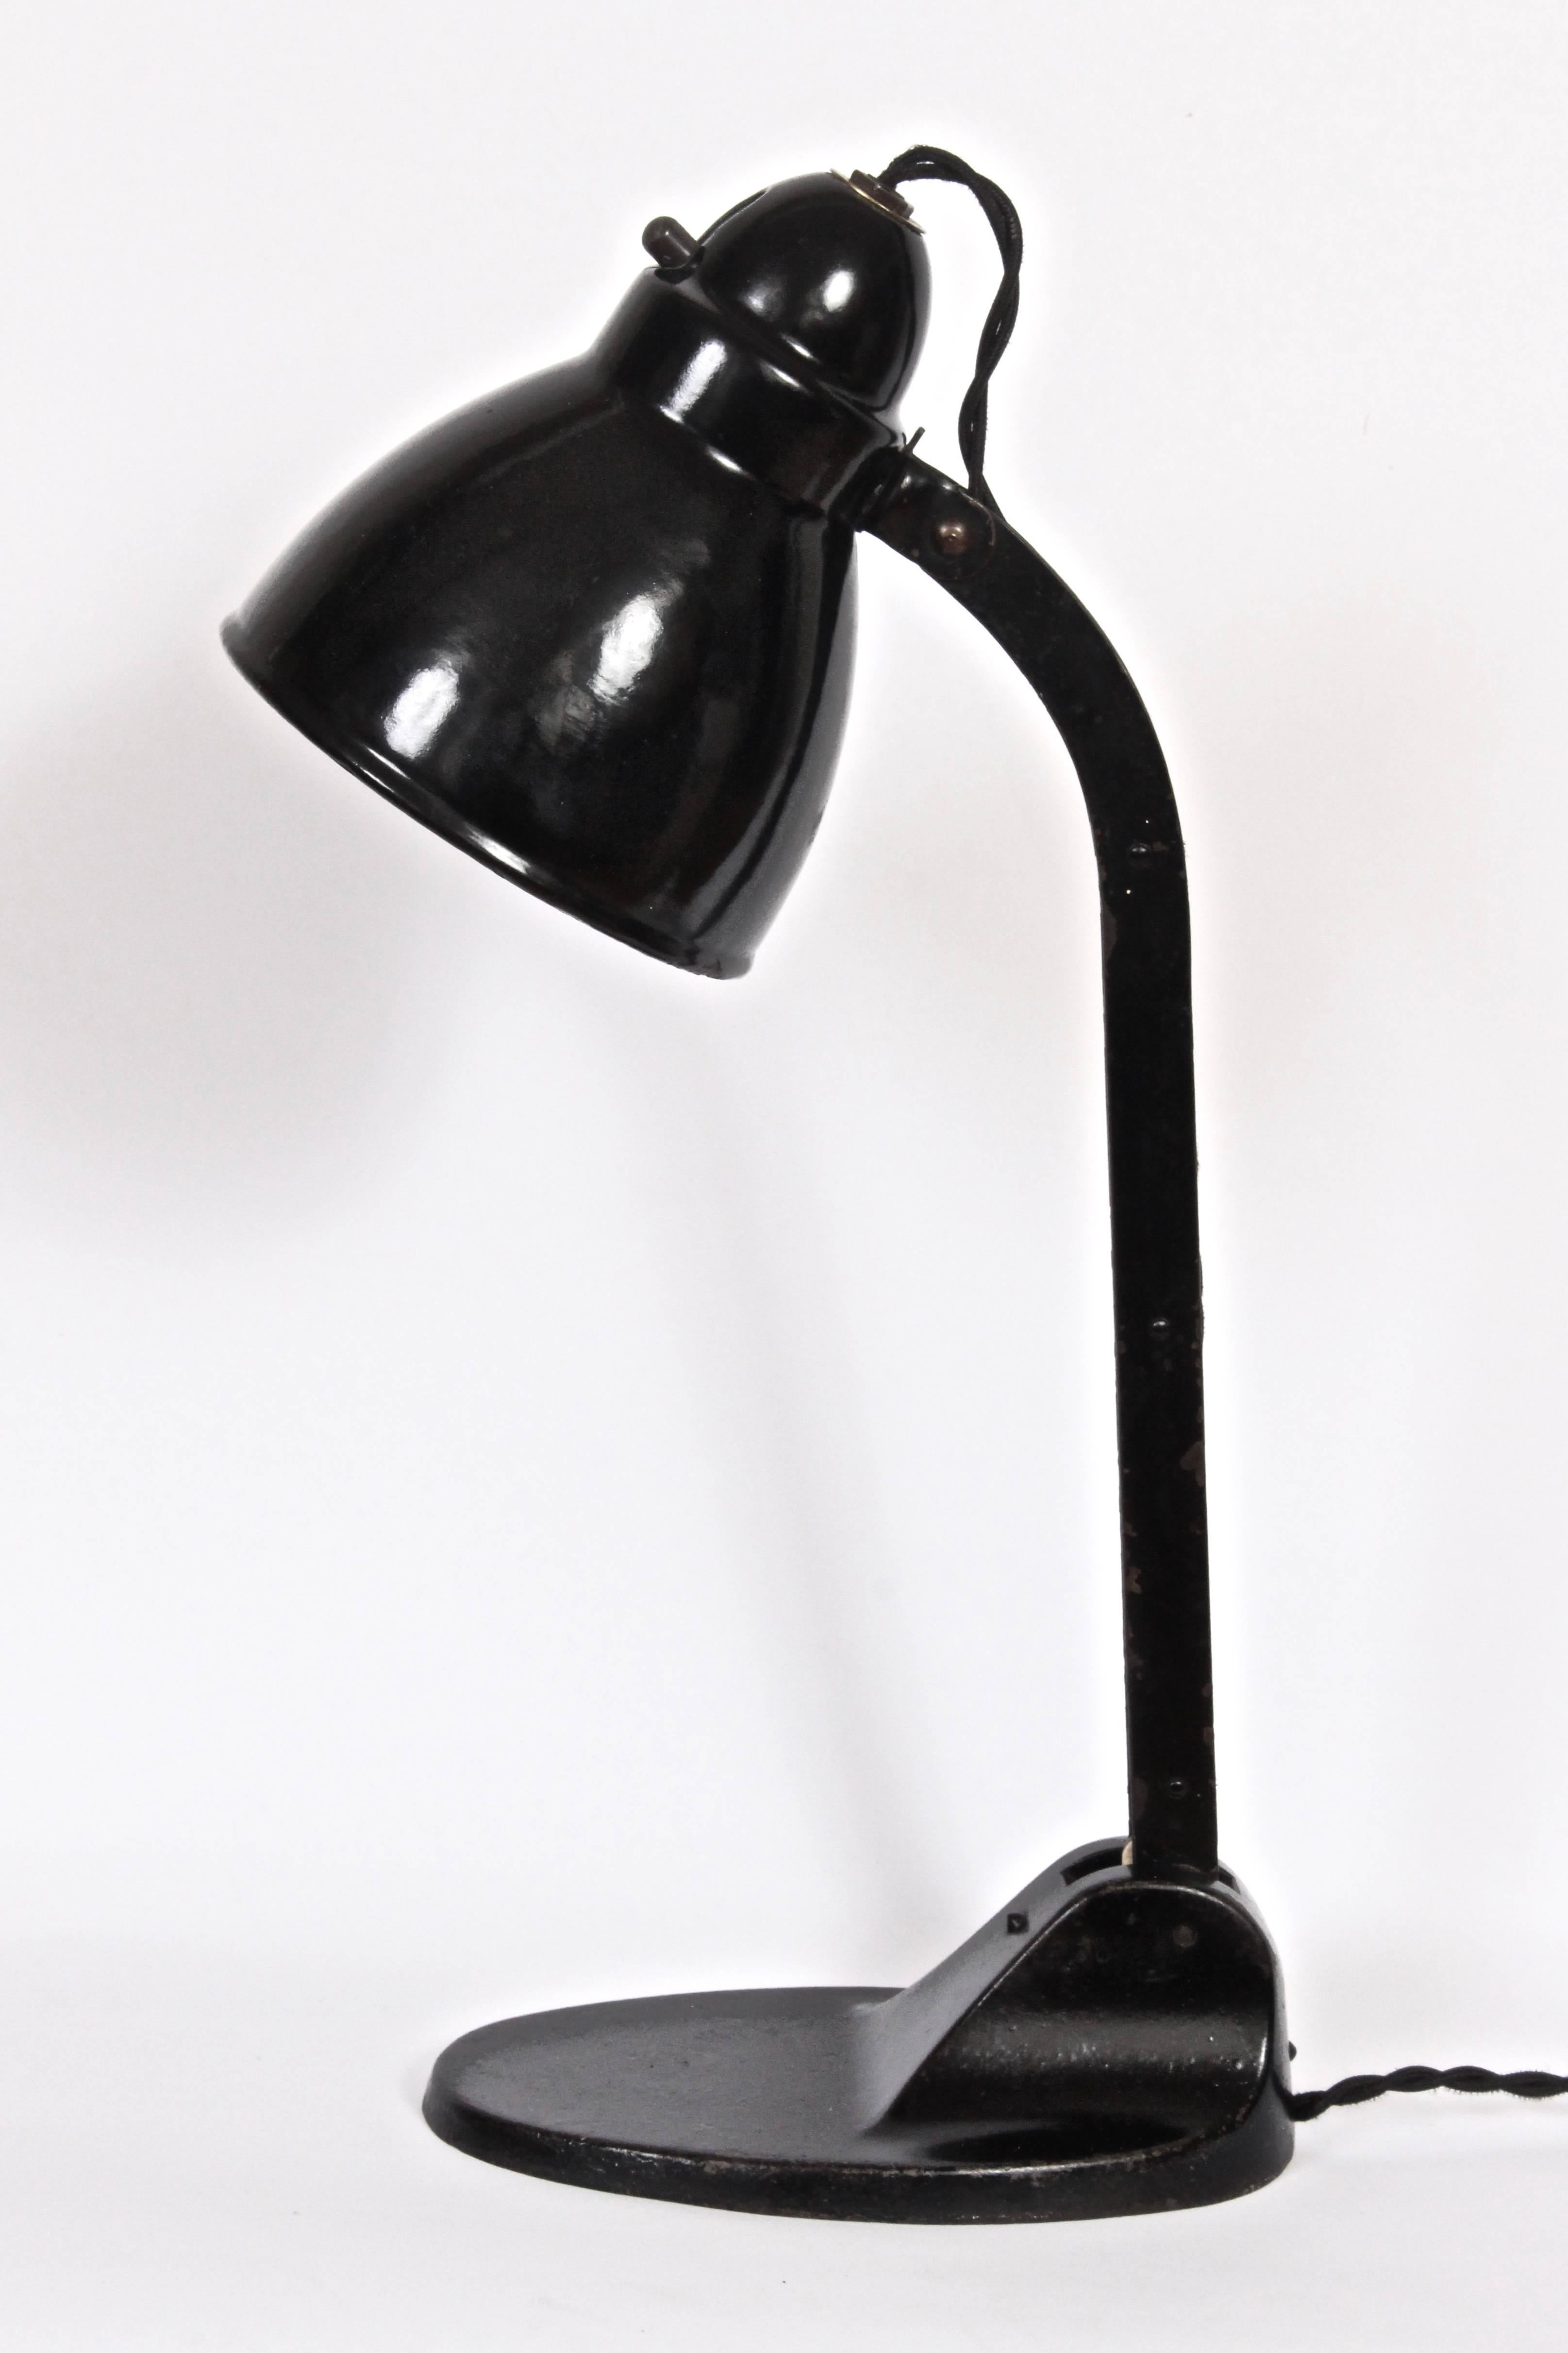 Timeless, Industrial and adjustable Viktoria Lampe table lamp in the style of Jacobus Johannes Pieter Oud. Featuring adjustable black enameled steel shade and column with sturdy black cast Iron base. Original toggle switch. Small footprint. Stamped